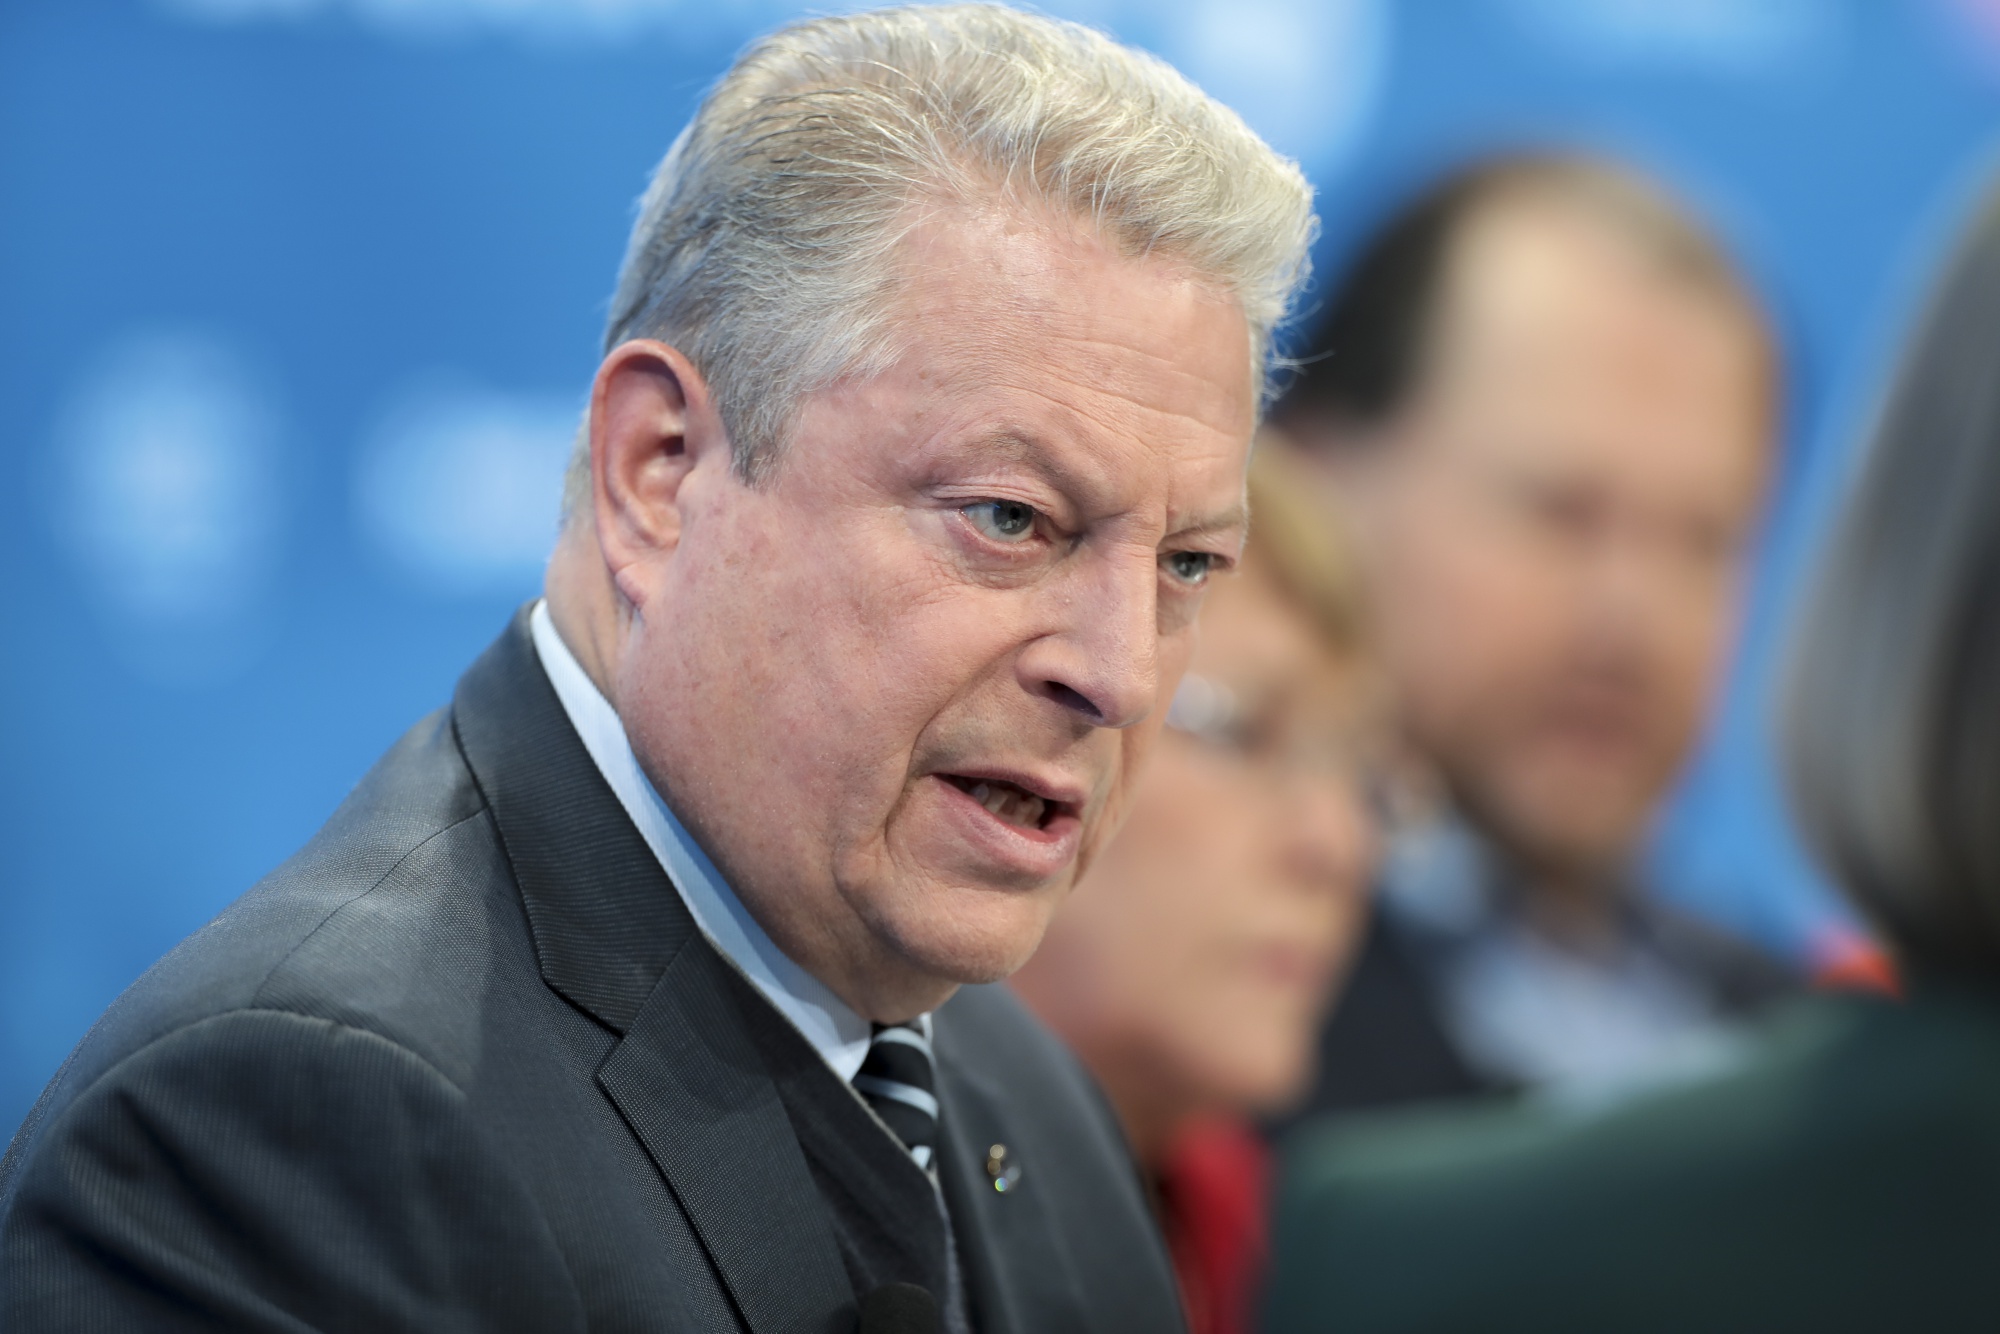 Former U.S. Vice President Al Gore speaks during a Bloomberg panel session on day two of the World Economic Forum (WEF) in Davos, Switzerland, on Wednesday, Jan. 23, 2019. World leaders, influential executives, bankers and policy makers attend the 49th annual meeting of the World Economic Forum in Davos from Jan. 22 - 25.